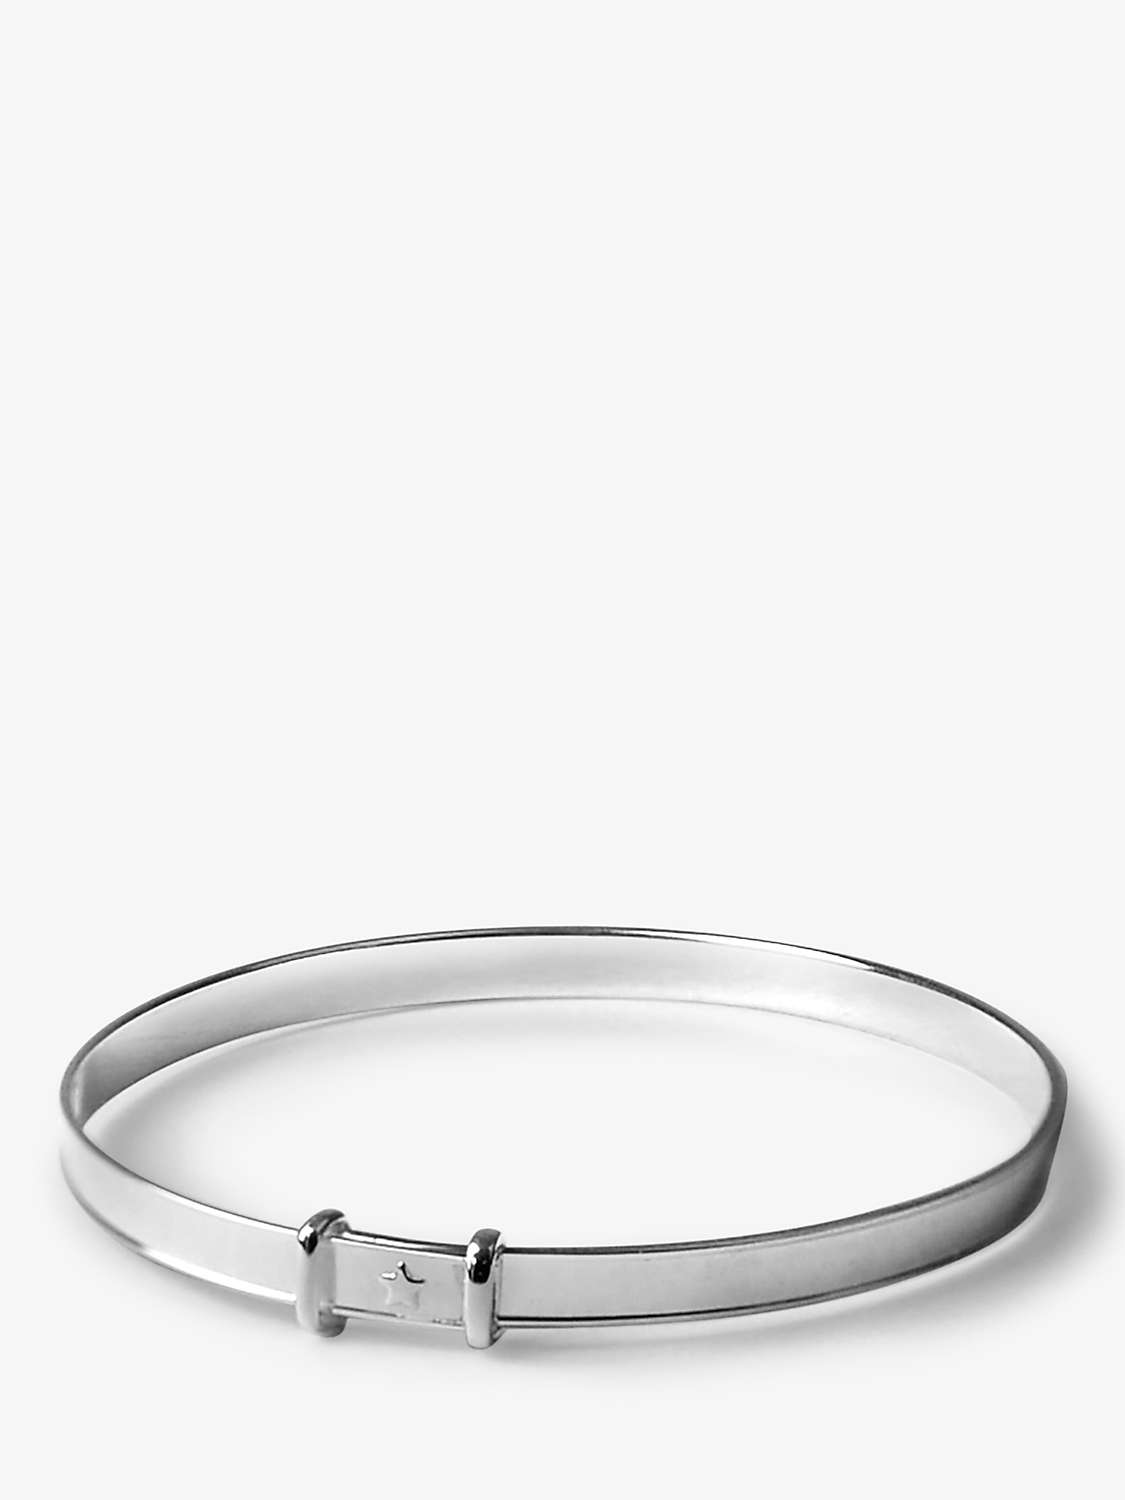 Buy Tales From The Earth Expanding Lucky Star Christening Bangle, Silver Online at johnlewis.com